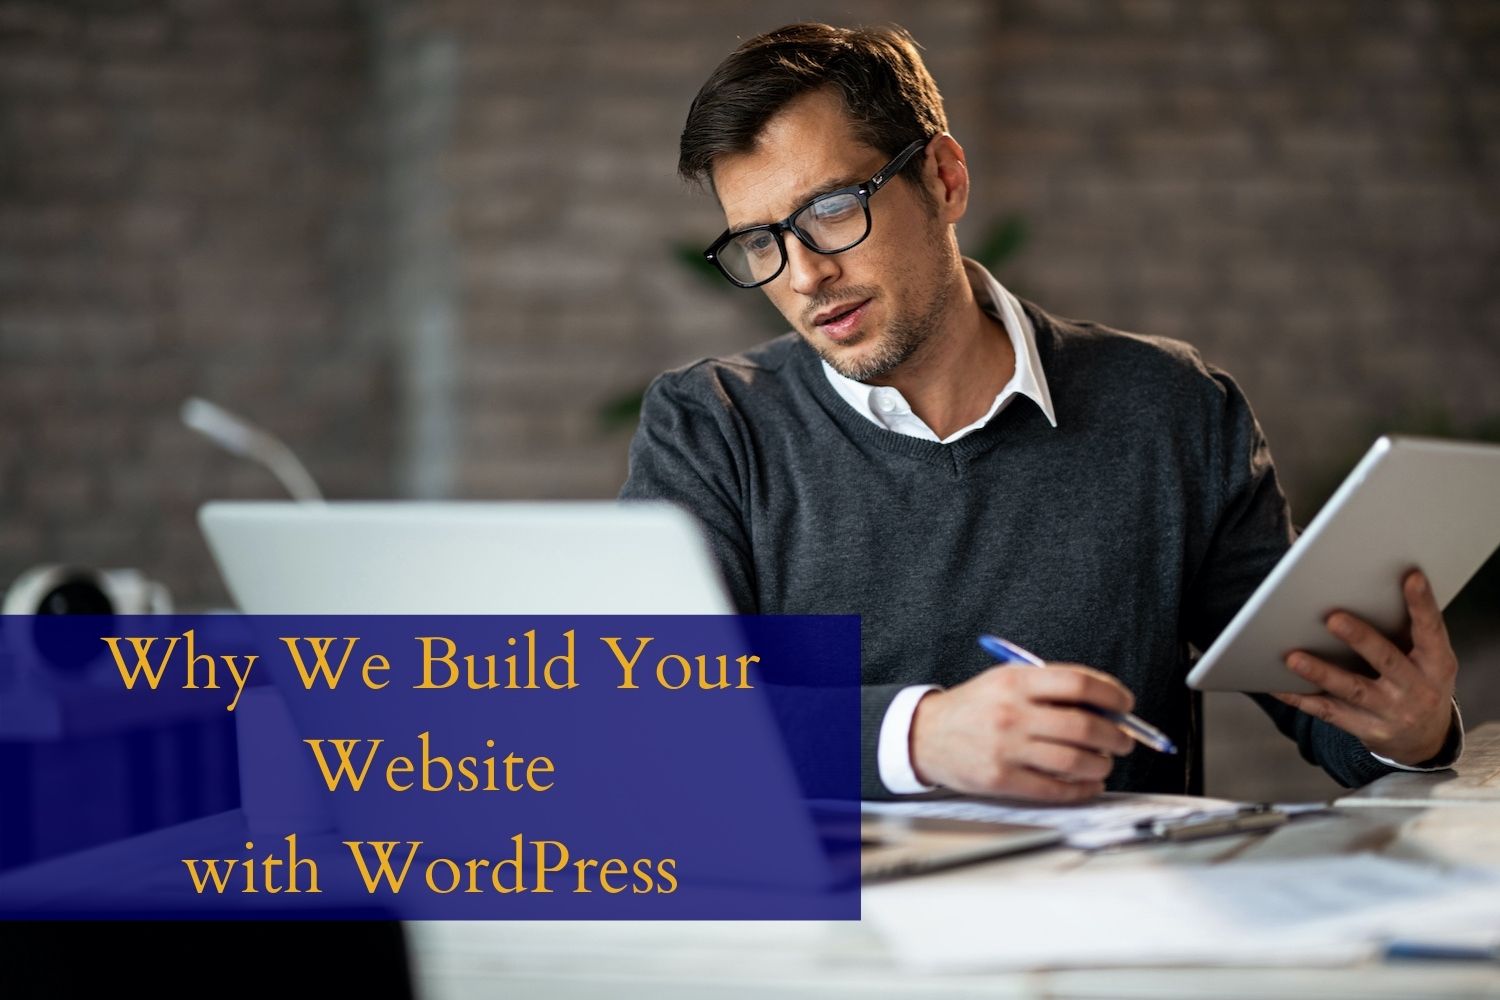 Man working at laptop computer, reading why we build your website with WordPress